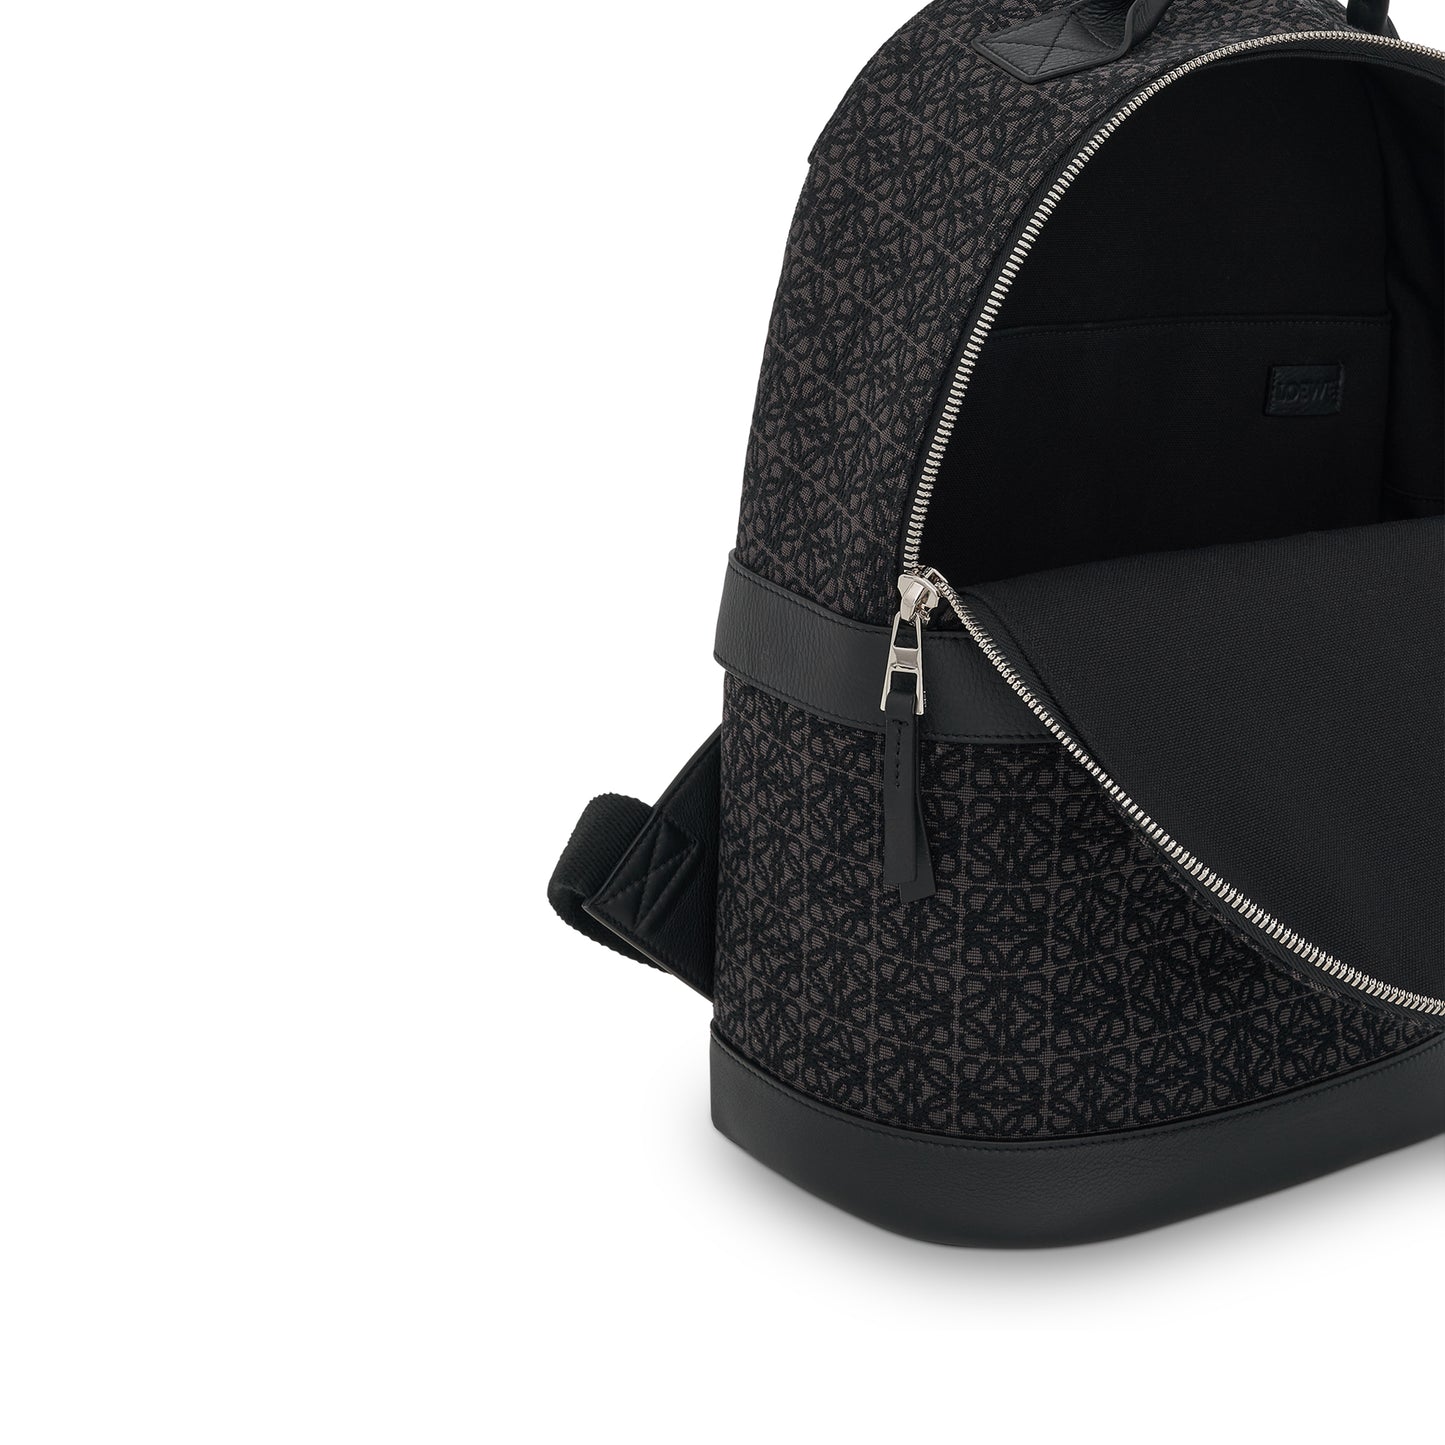 Round Backpack in Anagram Jacquard and Calfskin in Anthracite